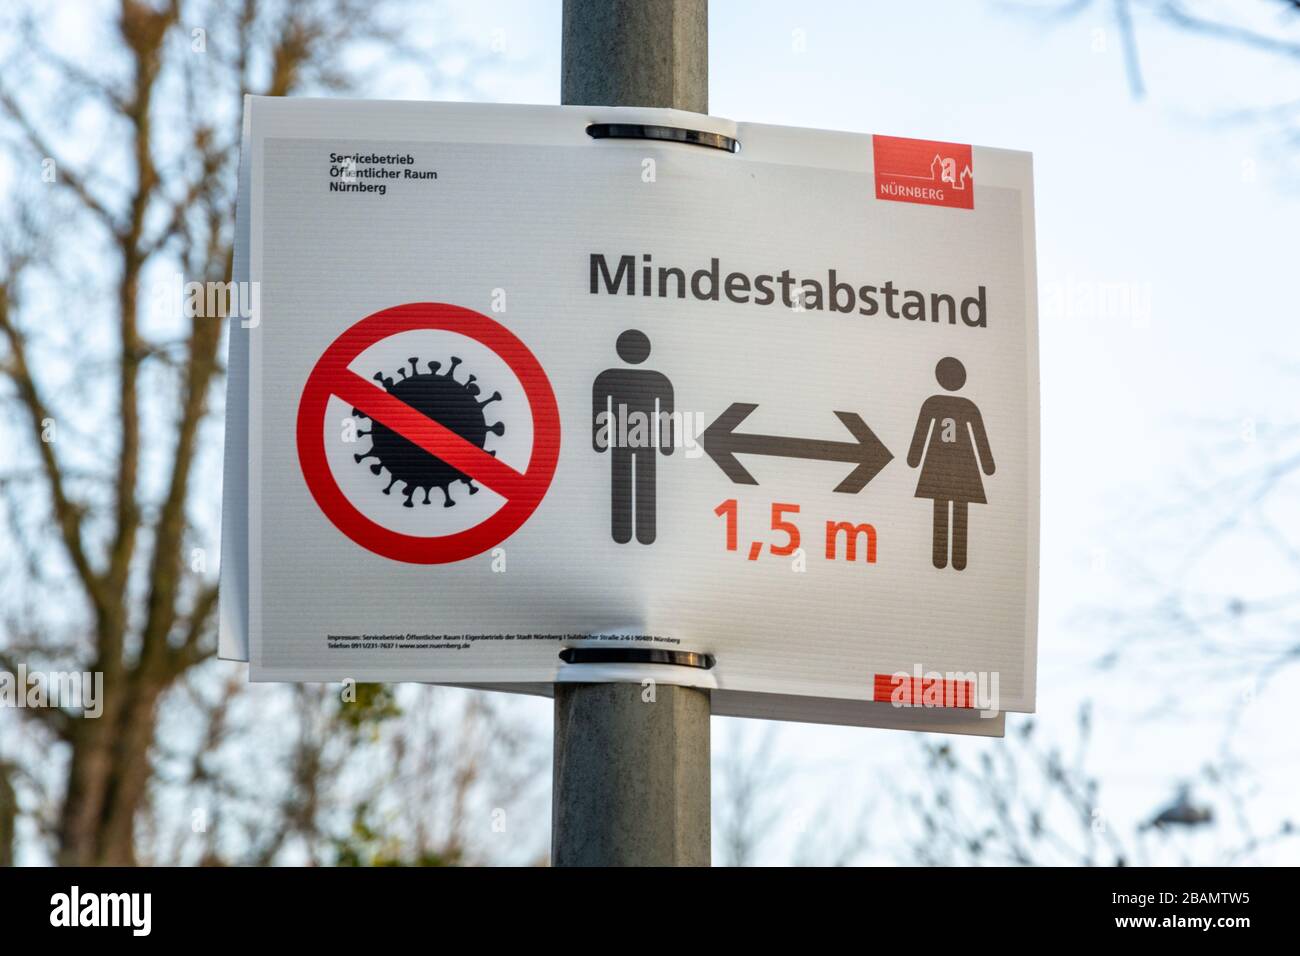 NUERNBERG, GERMANY - March 27, 2020: Sign in German about keeping a minimum of 1.5m distance due to the Corona Virus Stock Photo